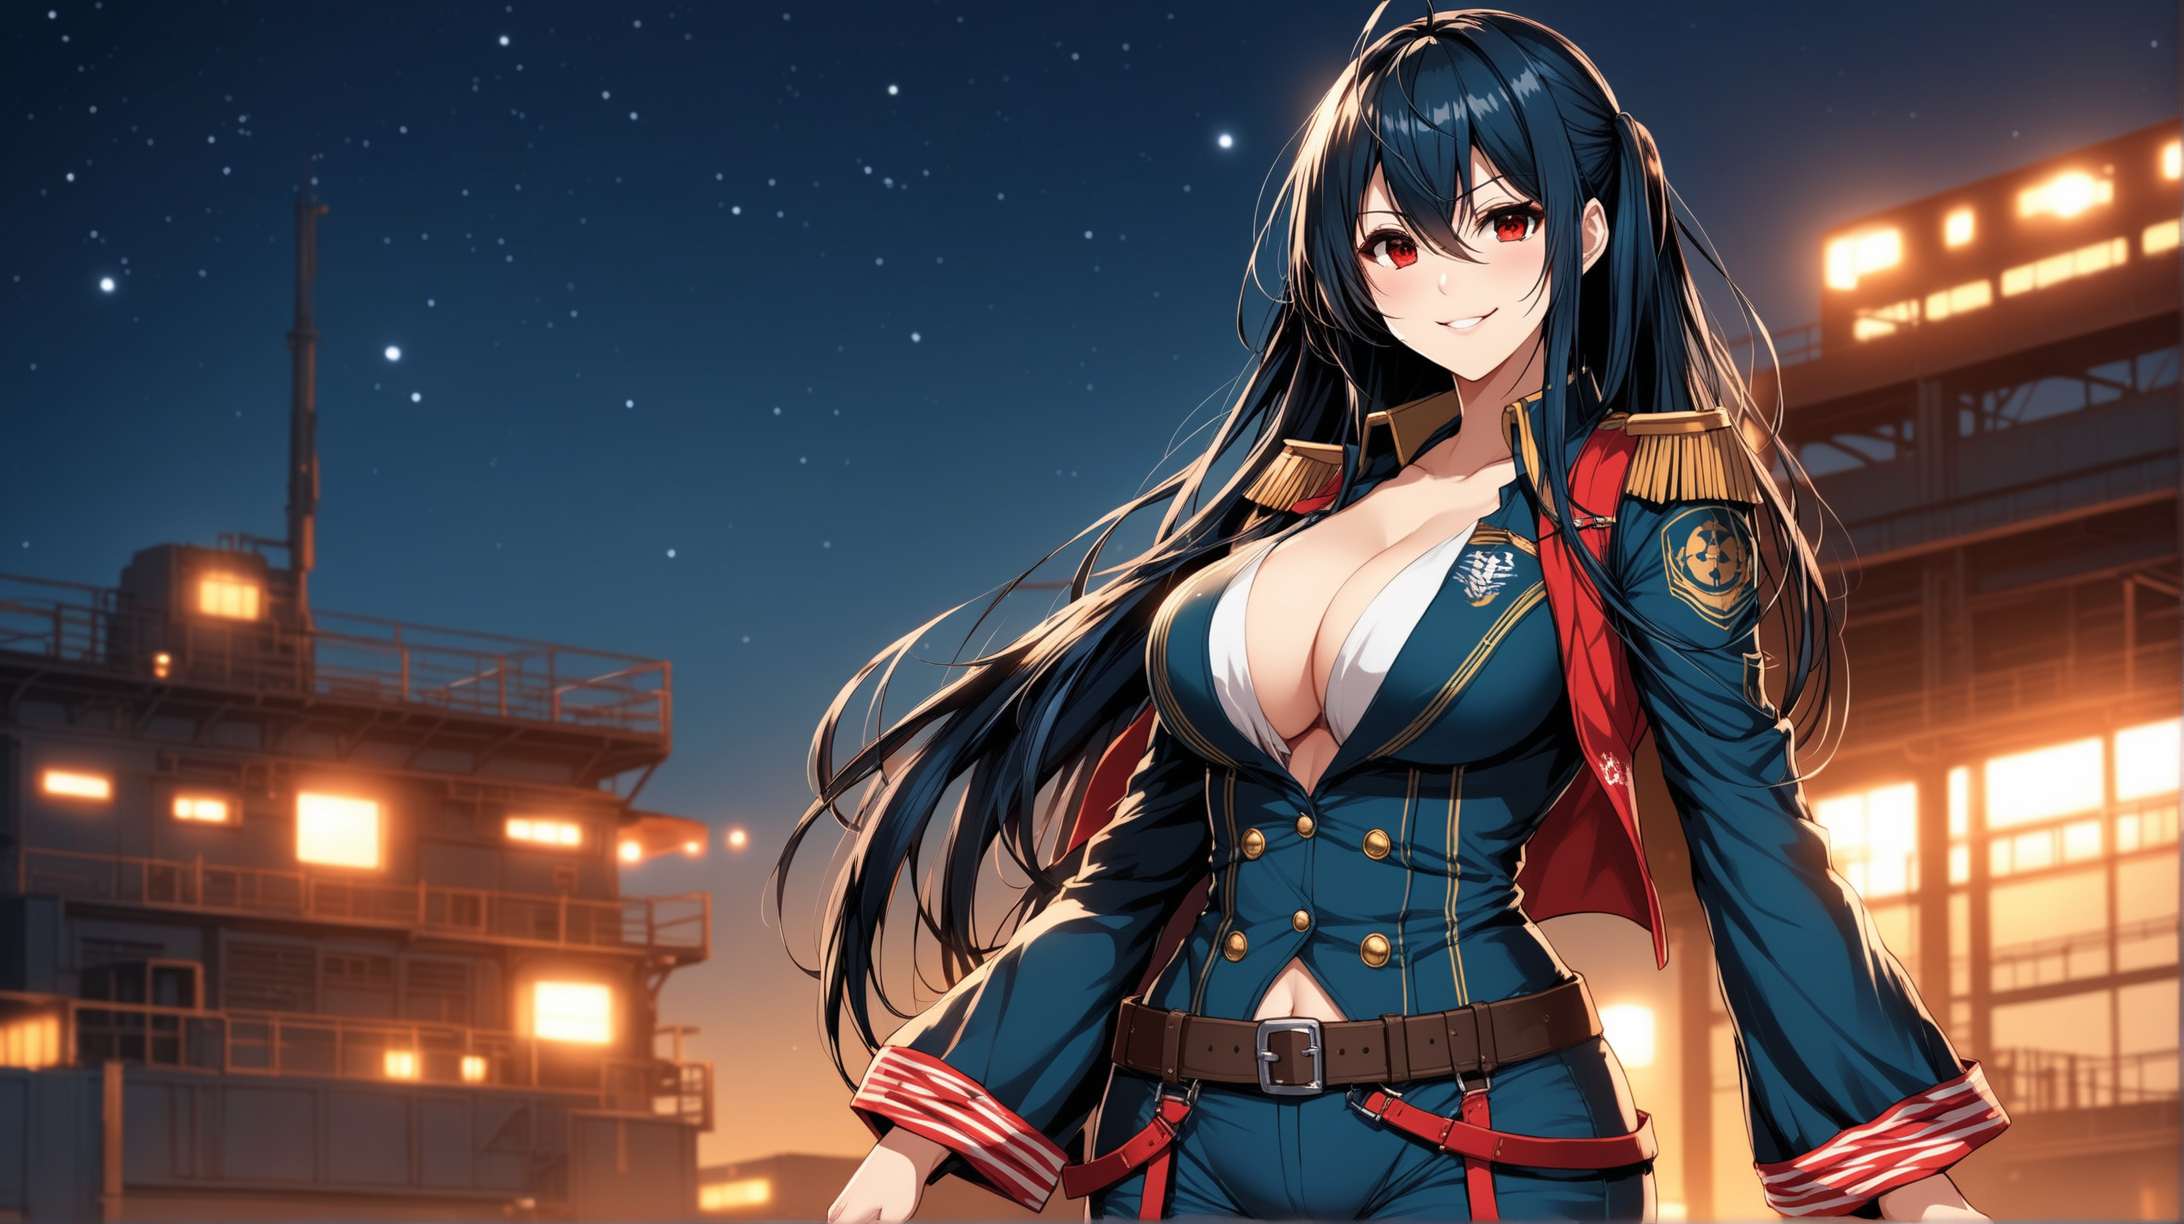 Draw the character Taihou from Azur Lane, long hair, red eyes, high quality, outdoors, at night, cowboy shot, in a confident pose, wearing an outfit inspired from the Fallout series, smiling at the viewer